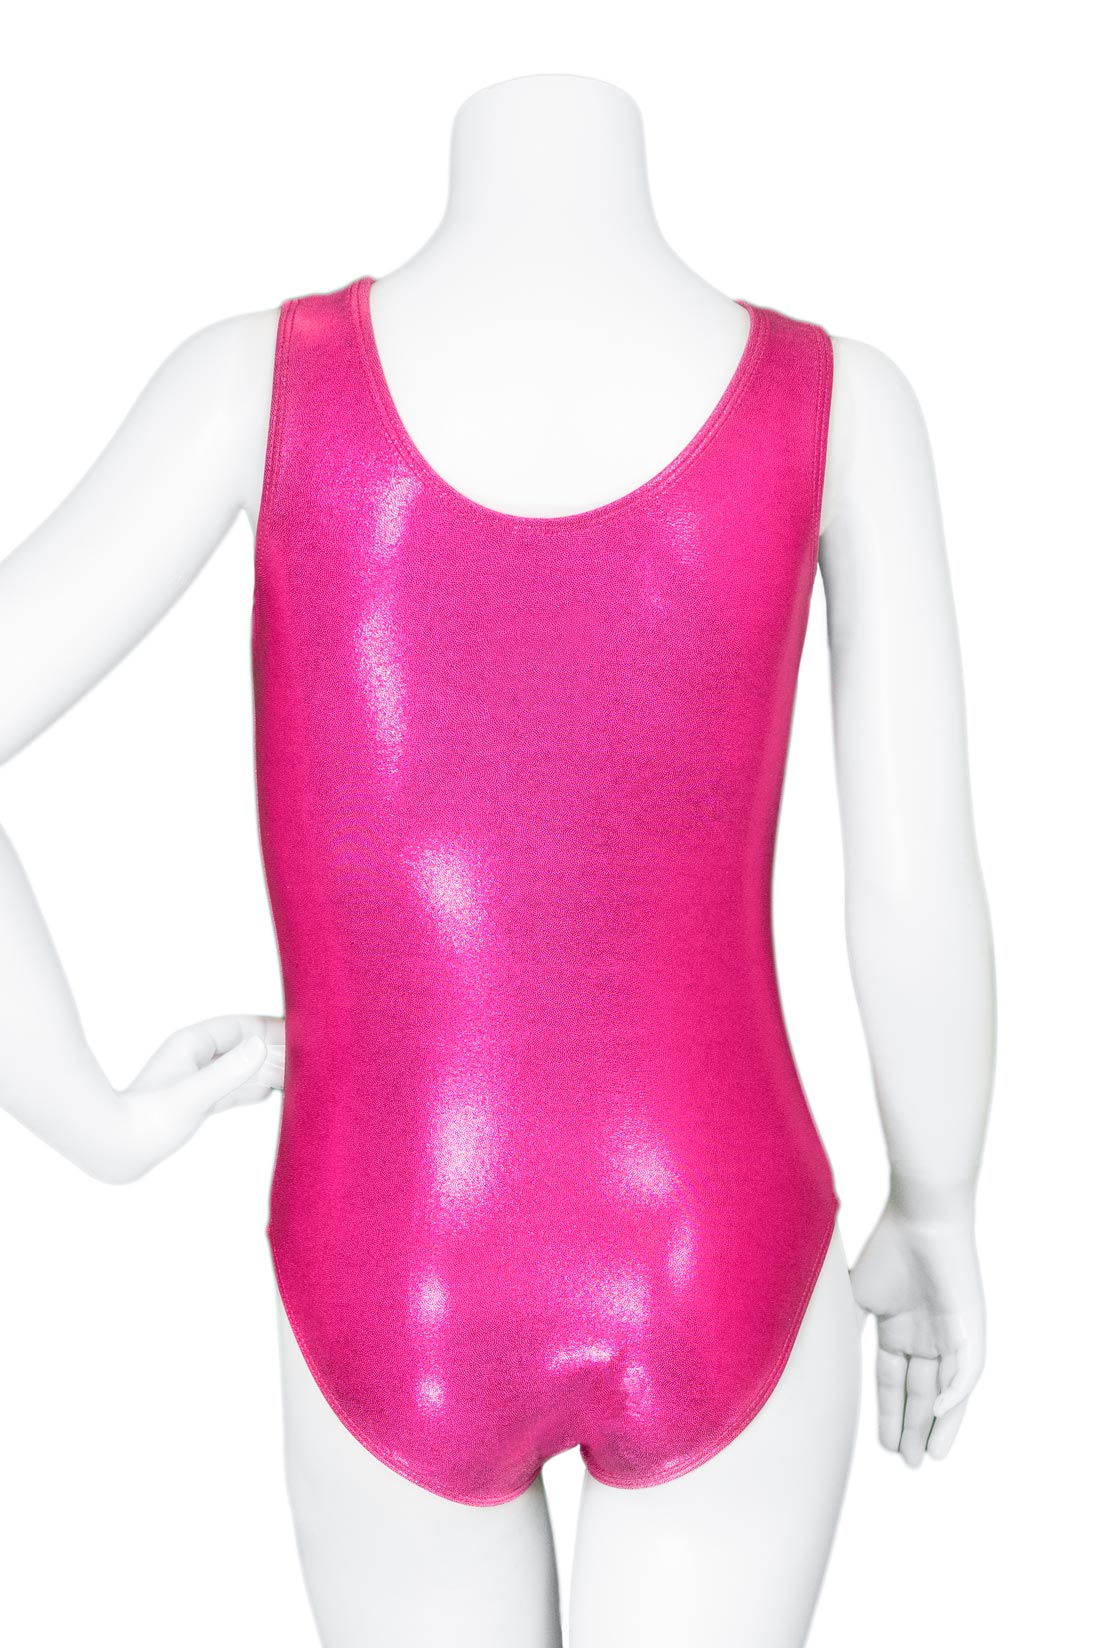 New Gymnastic LEOTARD all sizes High quality Hologram fabric and mystique 